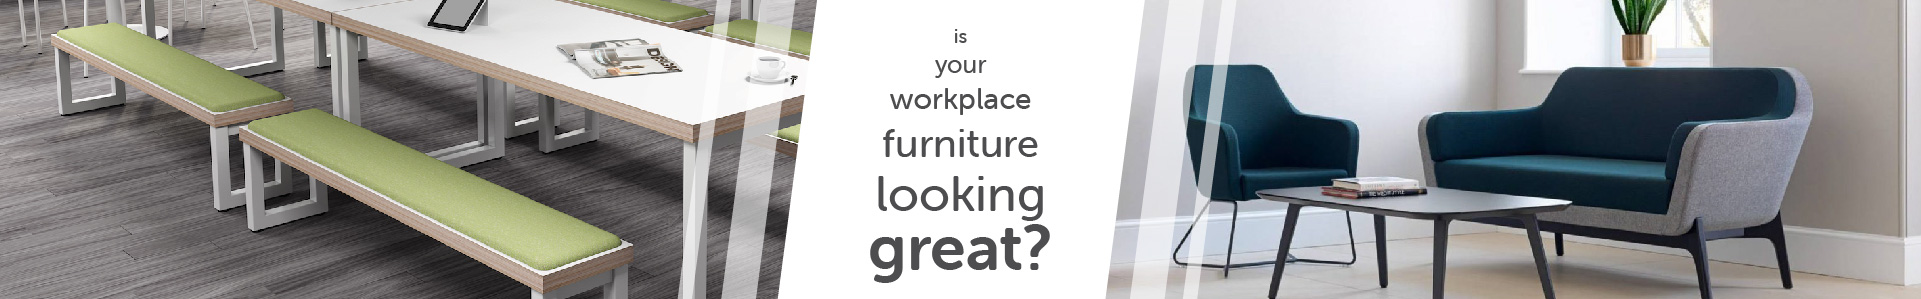 Is your workplace furniture looking great?